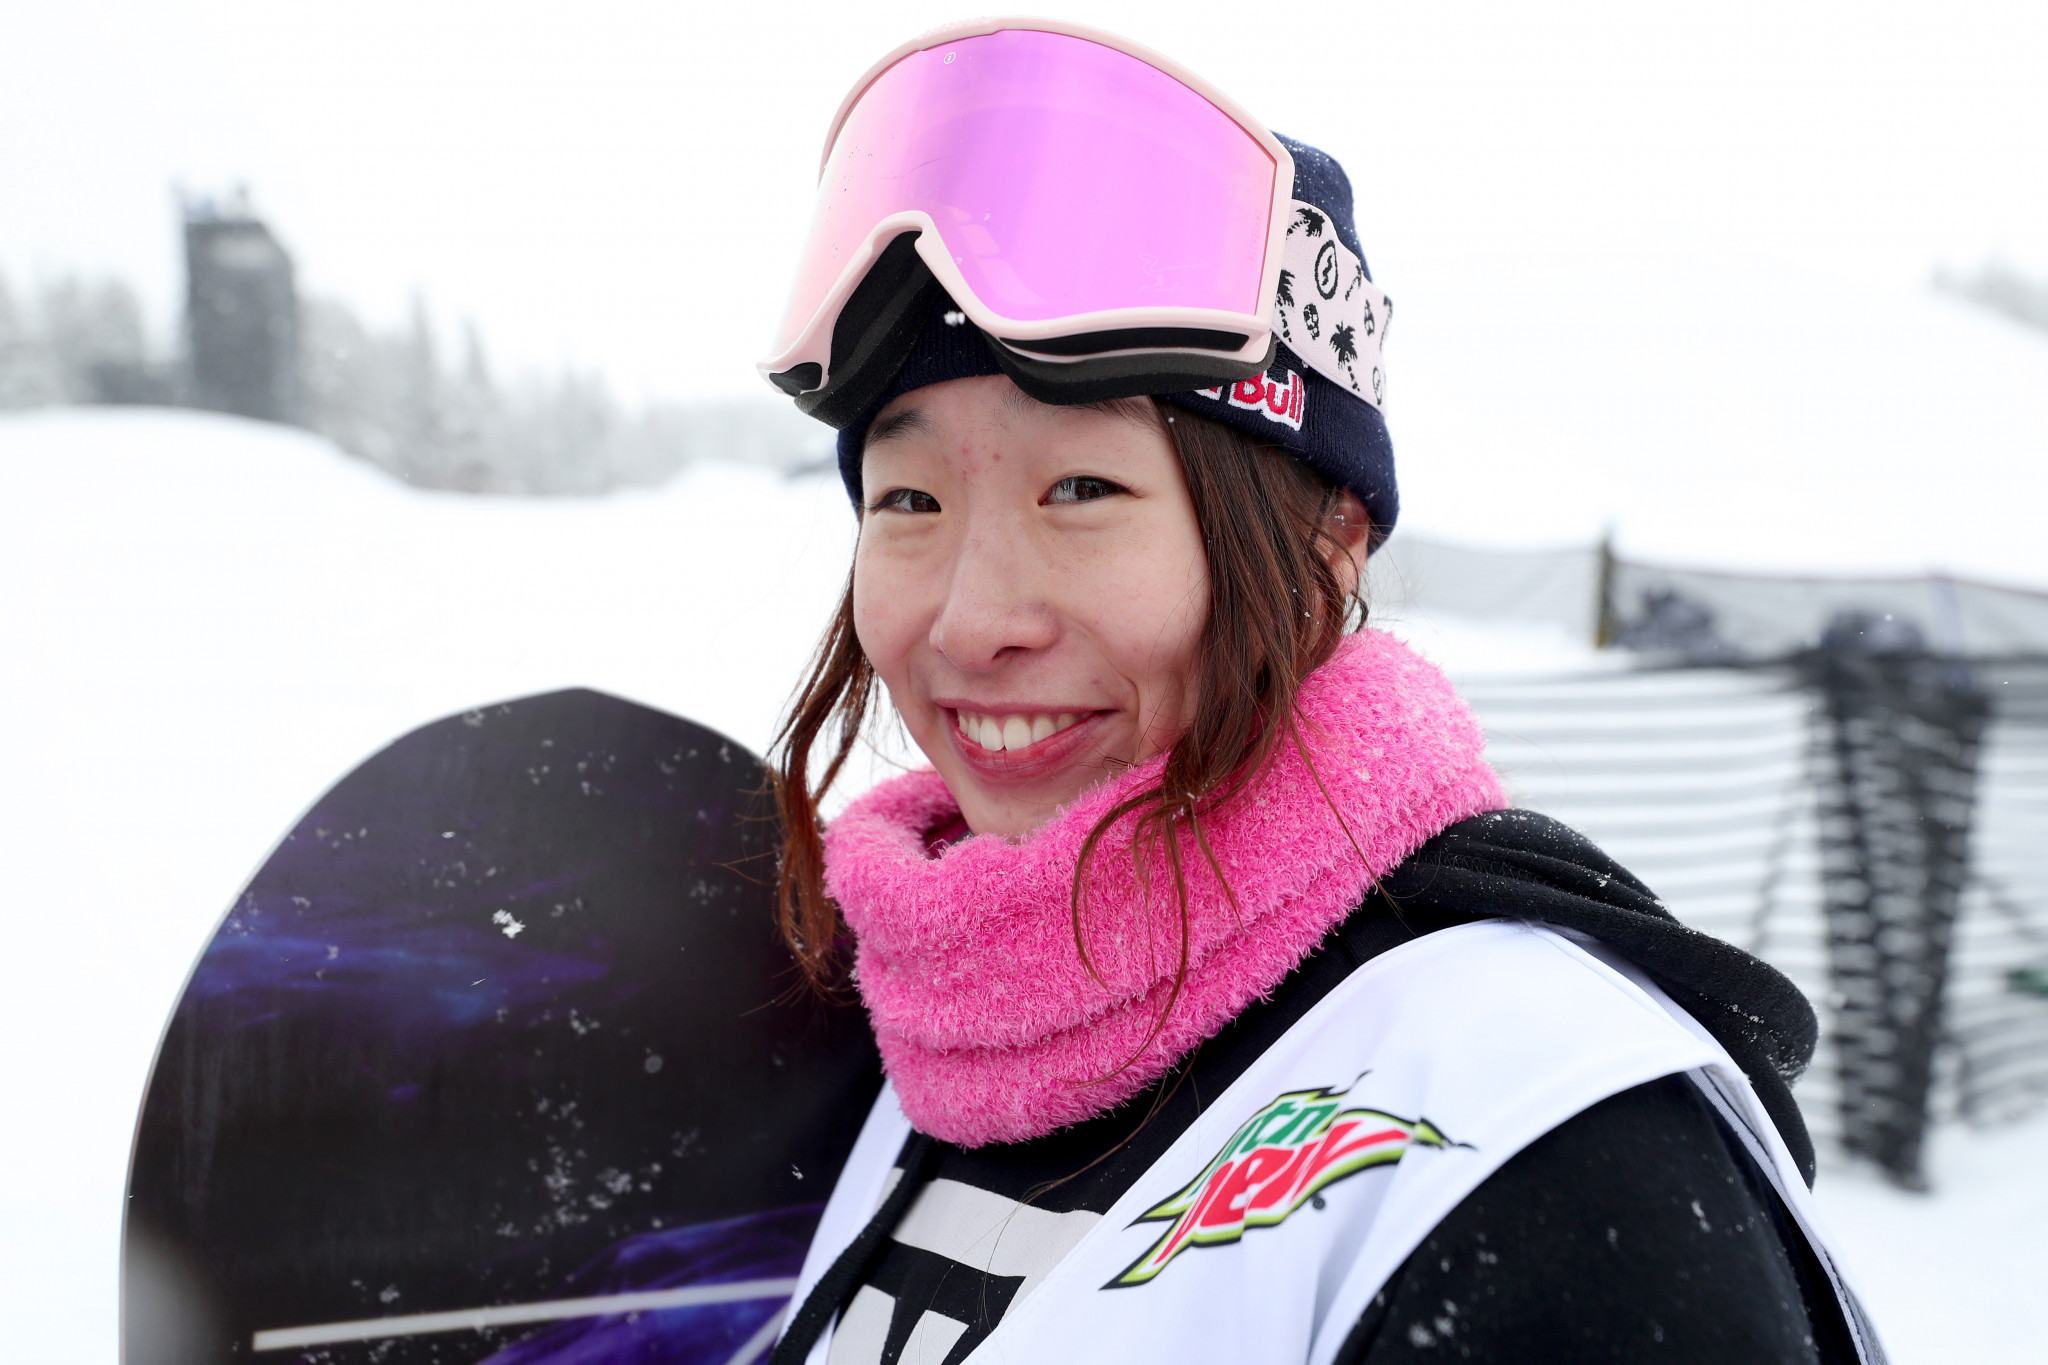 Miyabi Onitsuka topped women's qualifying for the big air contest in Kreischberg ©Getty Images